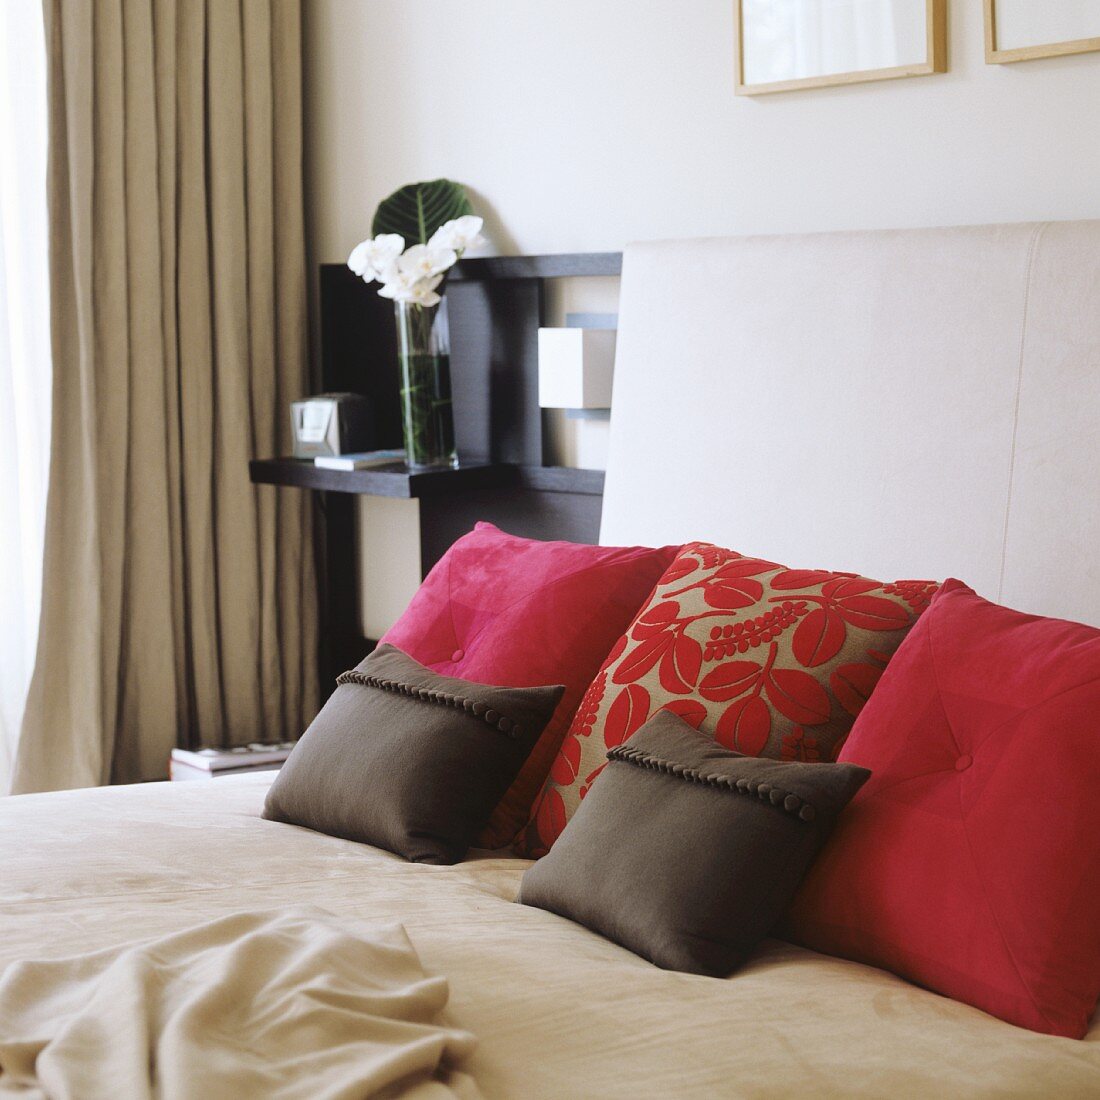 Scatter cushions on double bed with upholstered headboard in modern bedroom